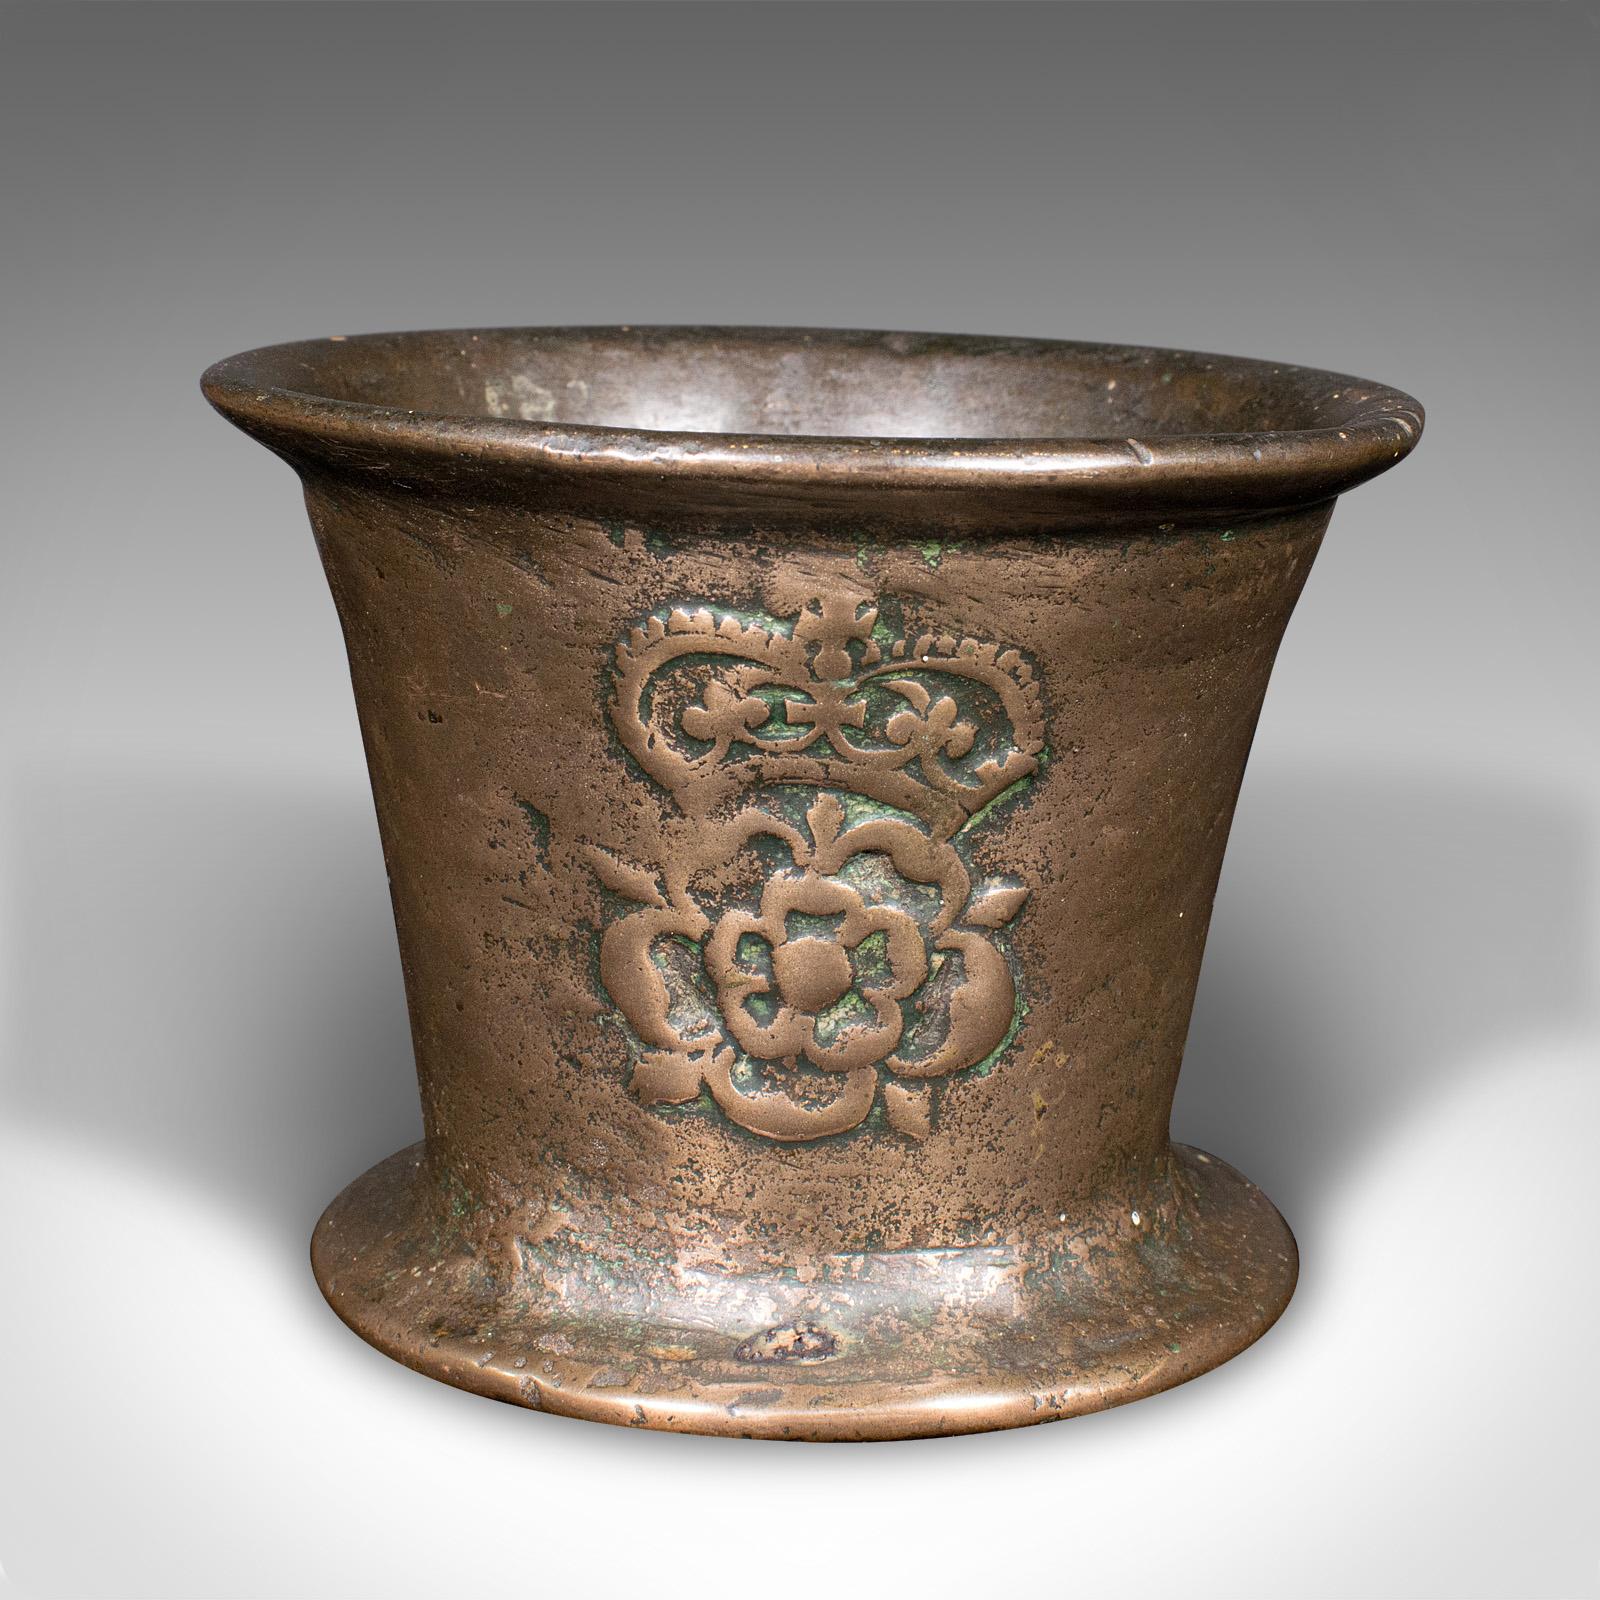 Other Antique Tudor Rose Mortar And Pestle, English, Bronze, Apothecary, 17th Century For Sale